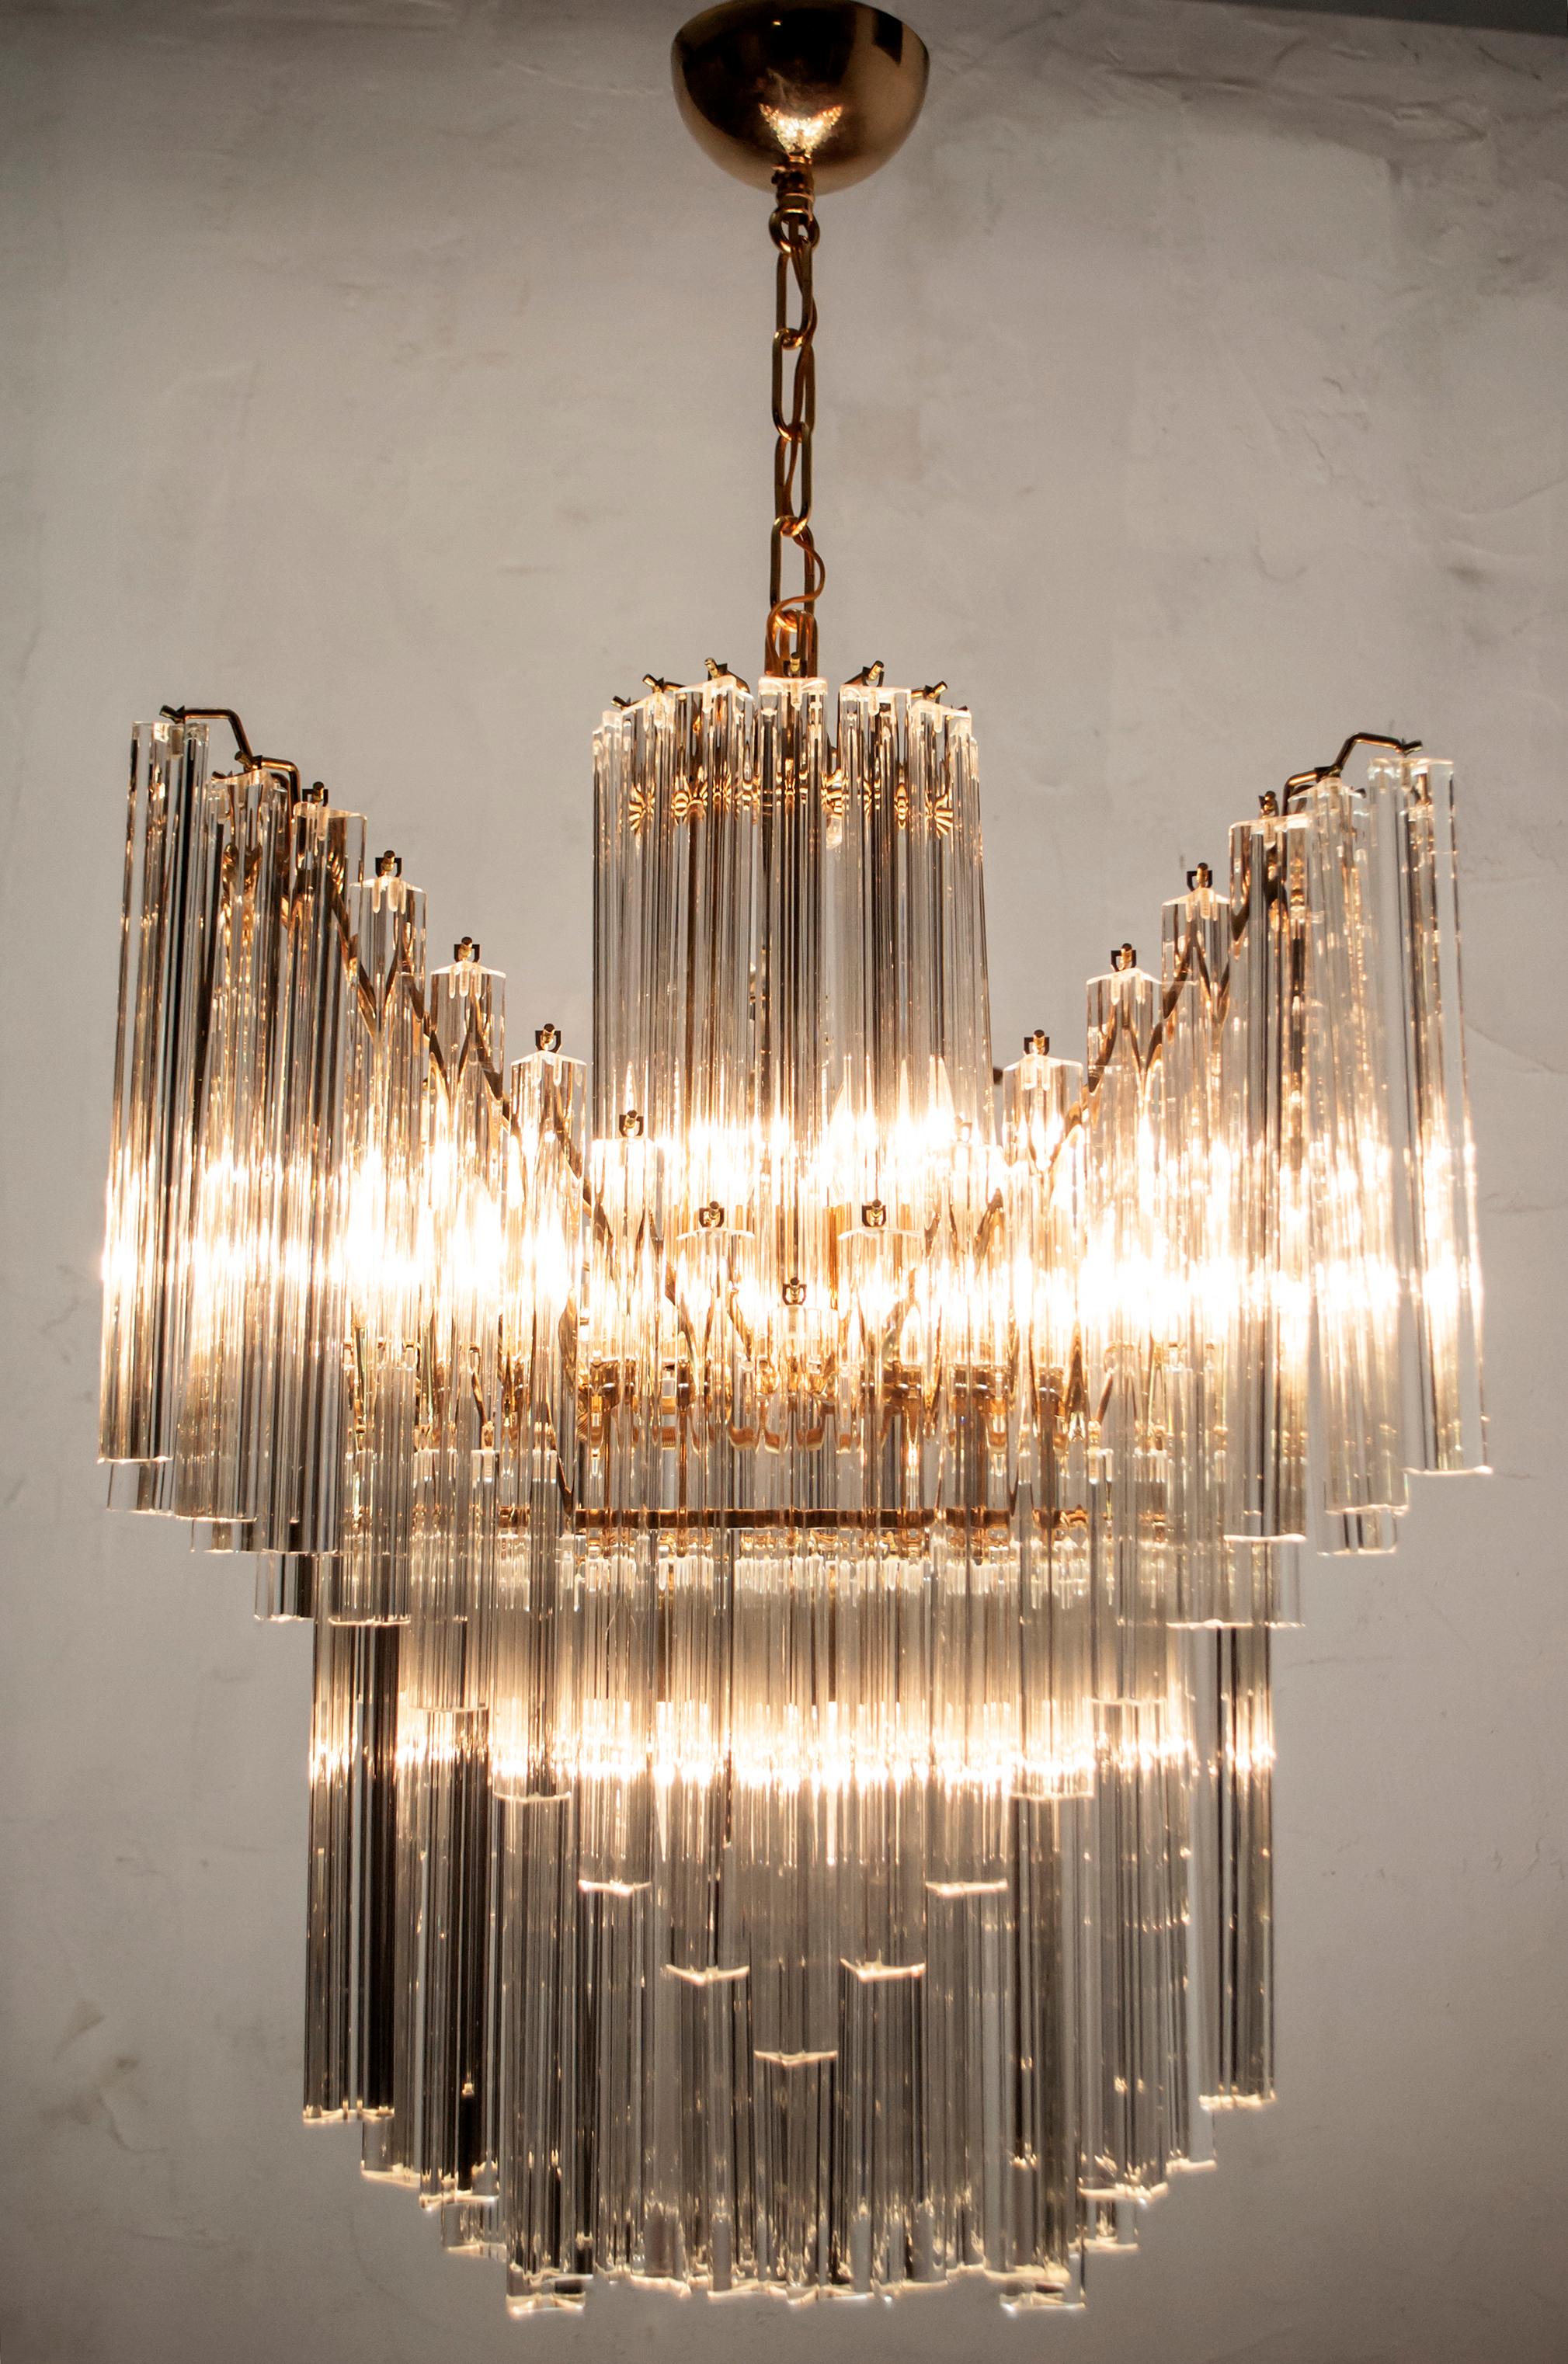 This six-light chandelier is made up of 94 Triedri in Murano glass and was produced by Venini in the 1960s, it has a three-pointed shape and a golden brass structure. The exact height, removed the chain, is 65 cm.

Paolo Venini (1895-1959) emerged